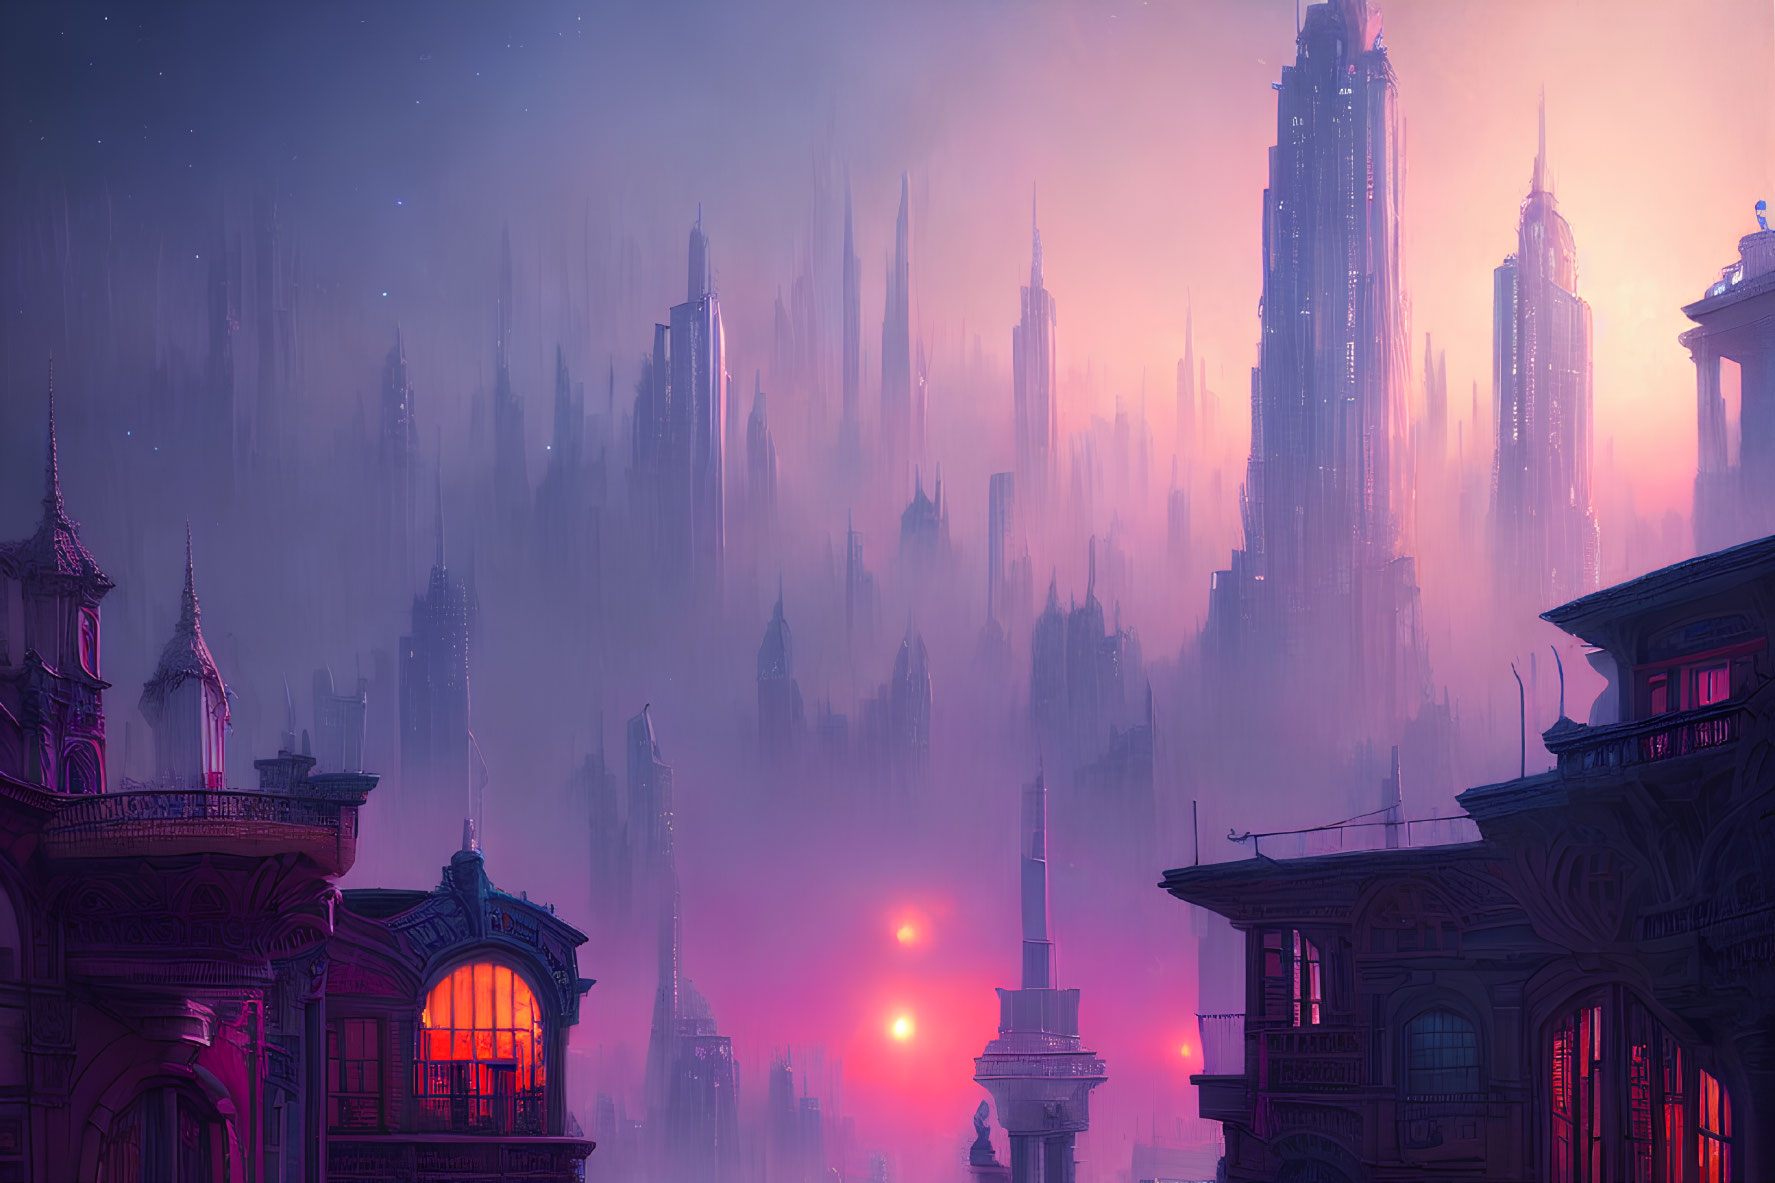 Futuristic cityscape at dusk with pink and purple hues